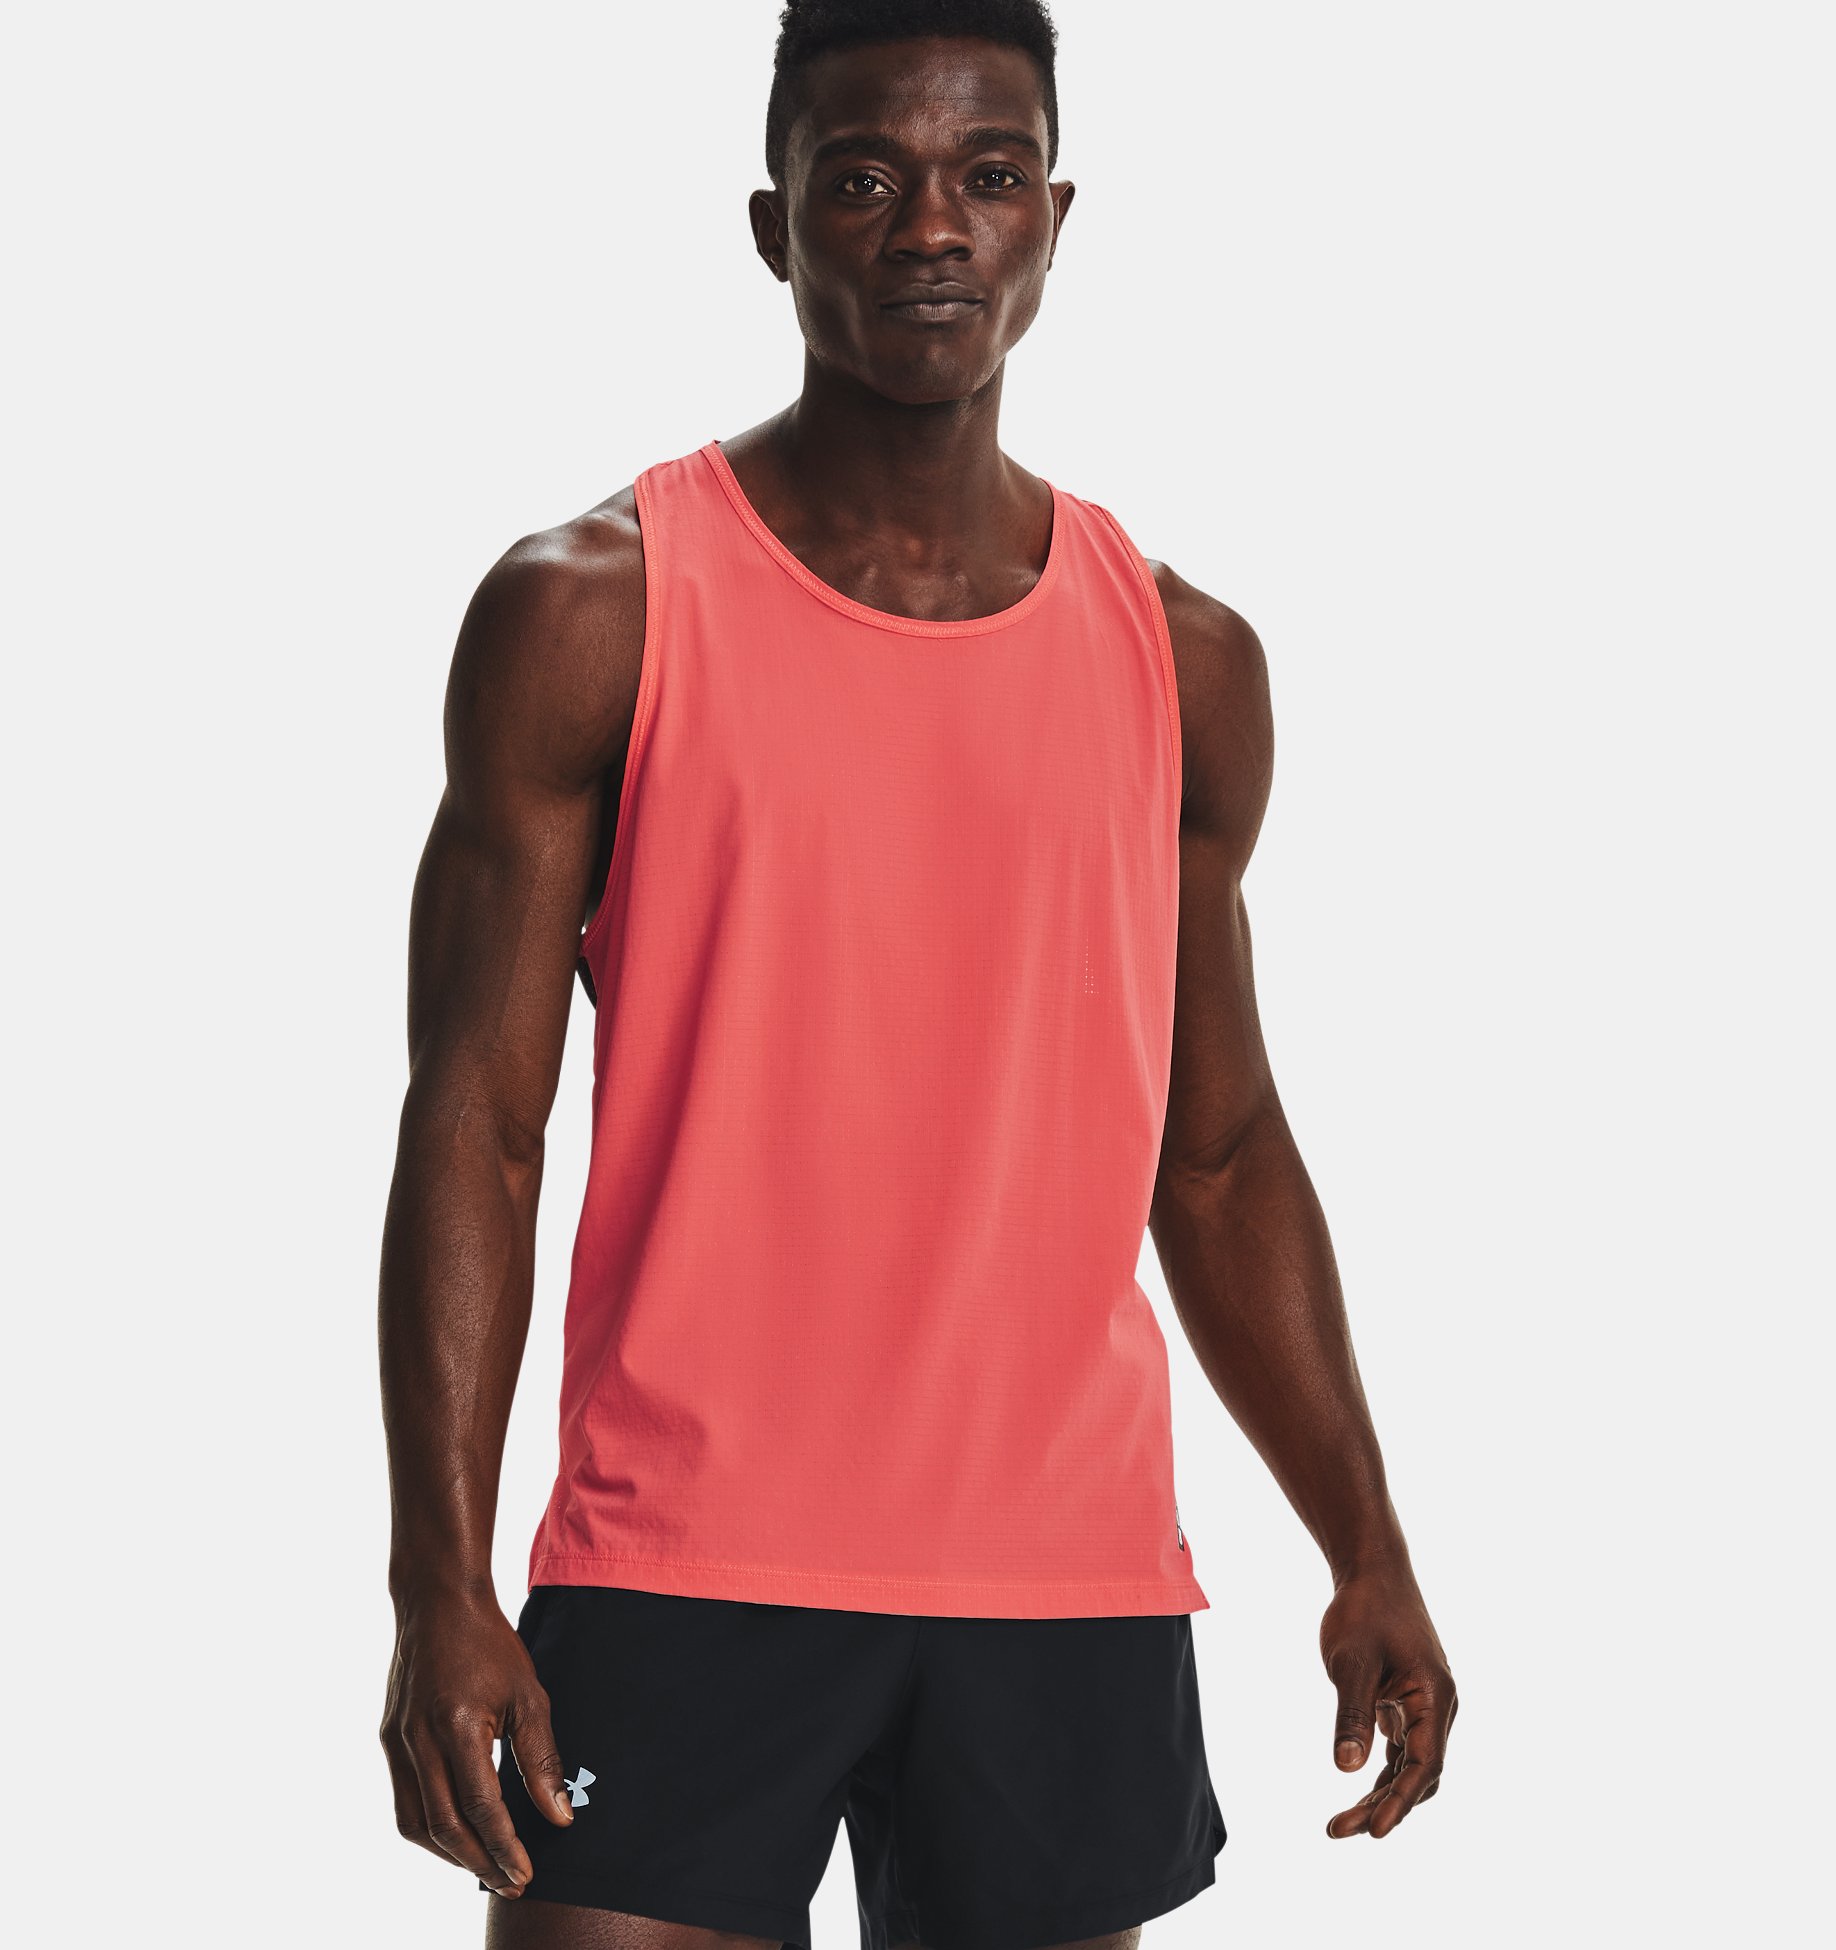 Mens Clothing T-shirts Sleeveless t-shirts Under Armour Run Anywhere Tank Top Red Large for Men 